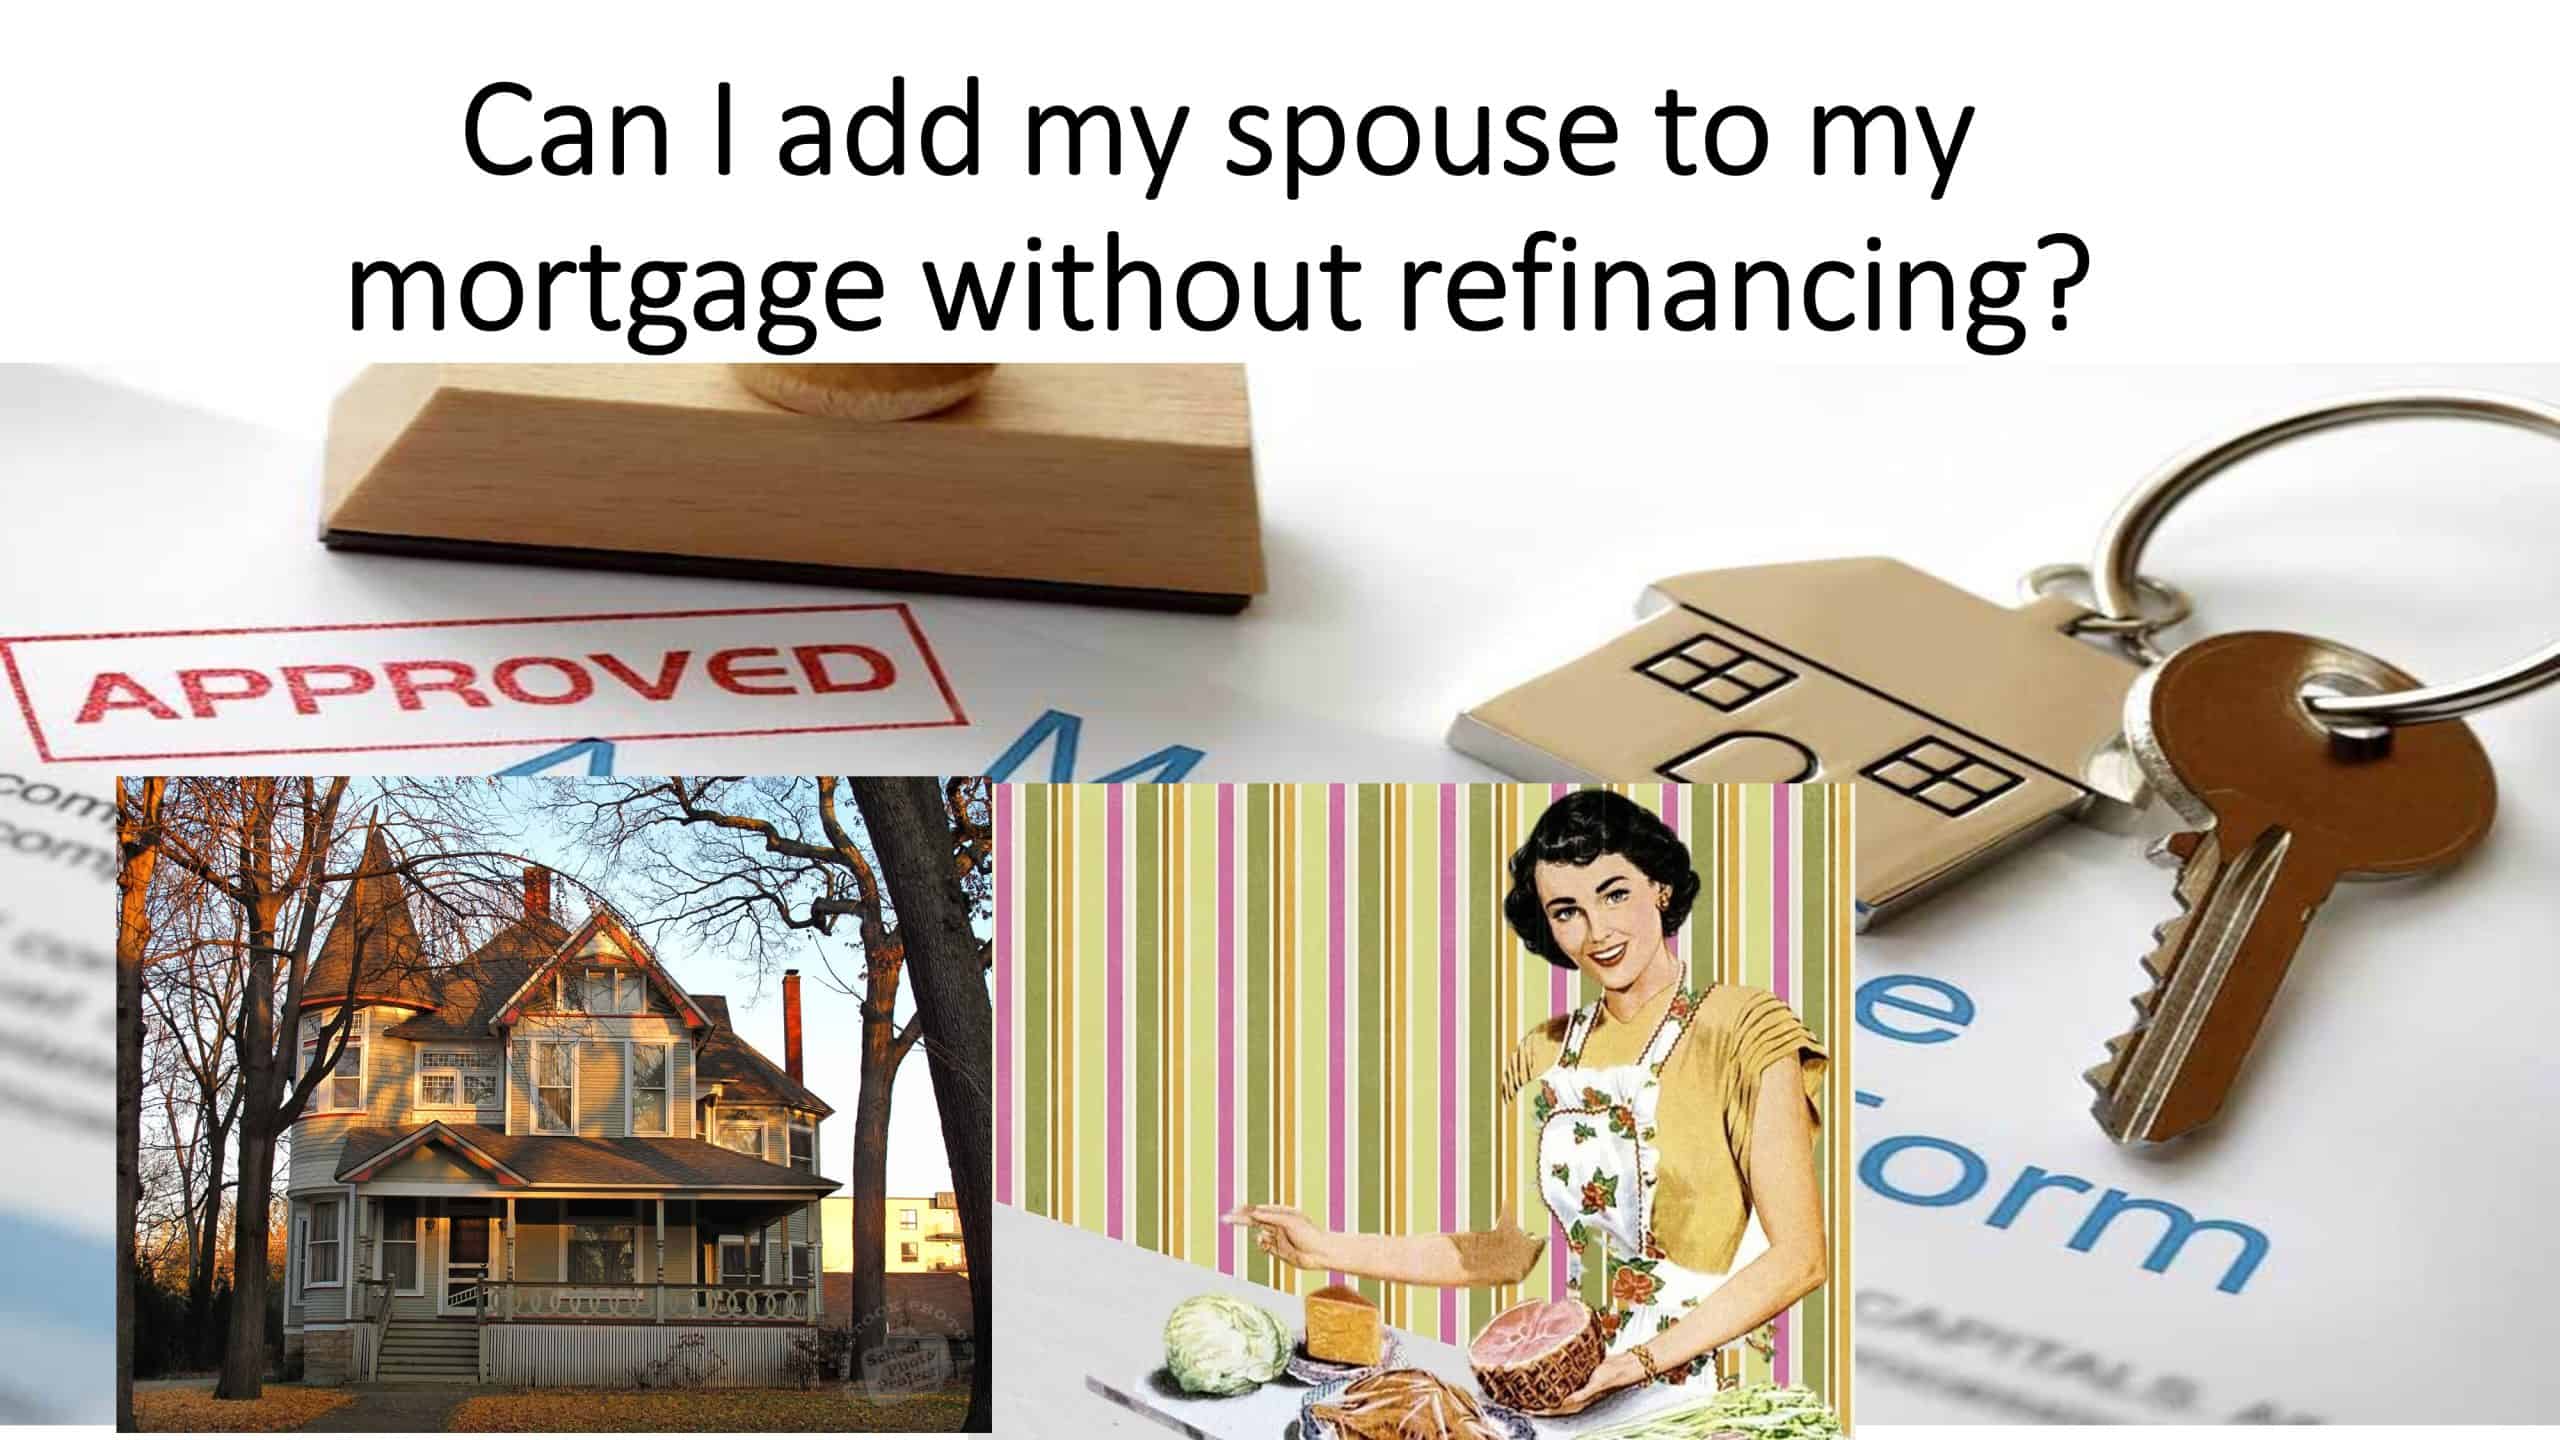 Can I add my spouse to my mortgage